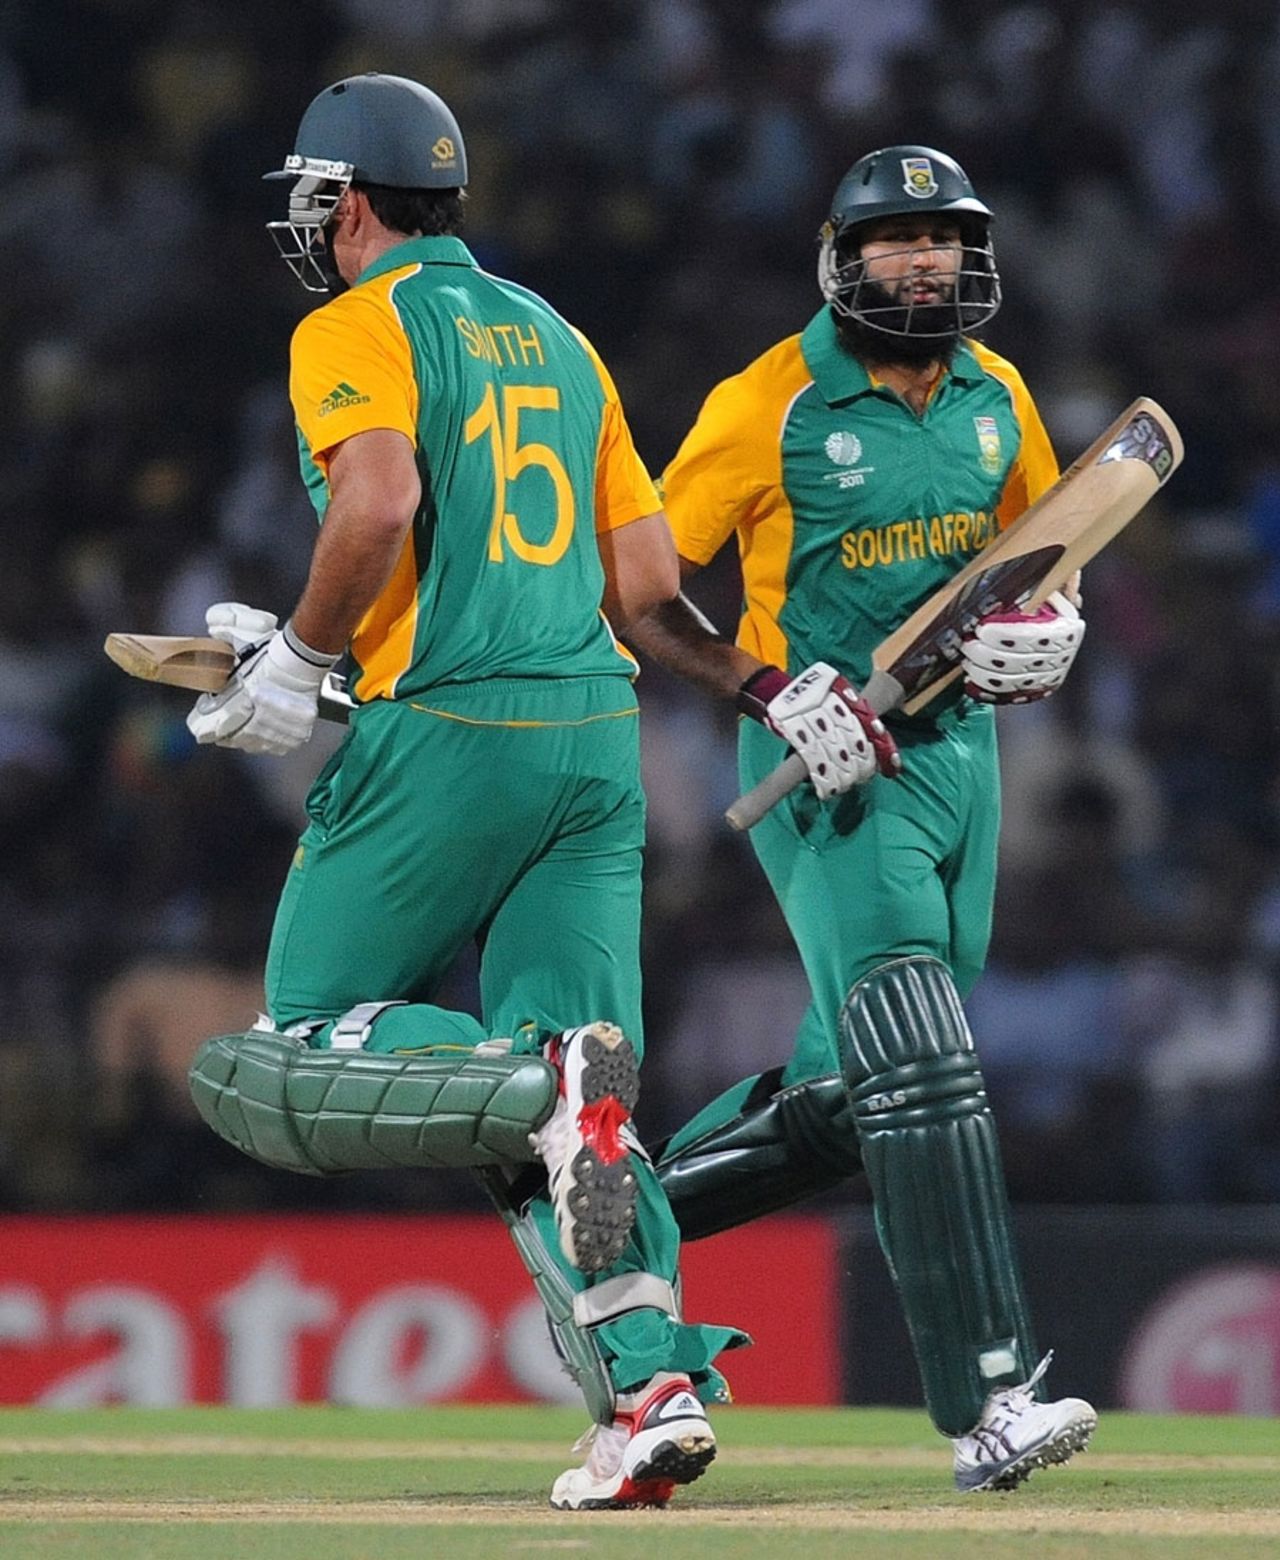 Graeme Smith and Hashim Amla put on 41 for the first wicket, India v South Africa, Group B, World Cup, Nagpur, March 12, 2011